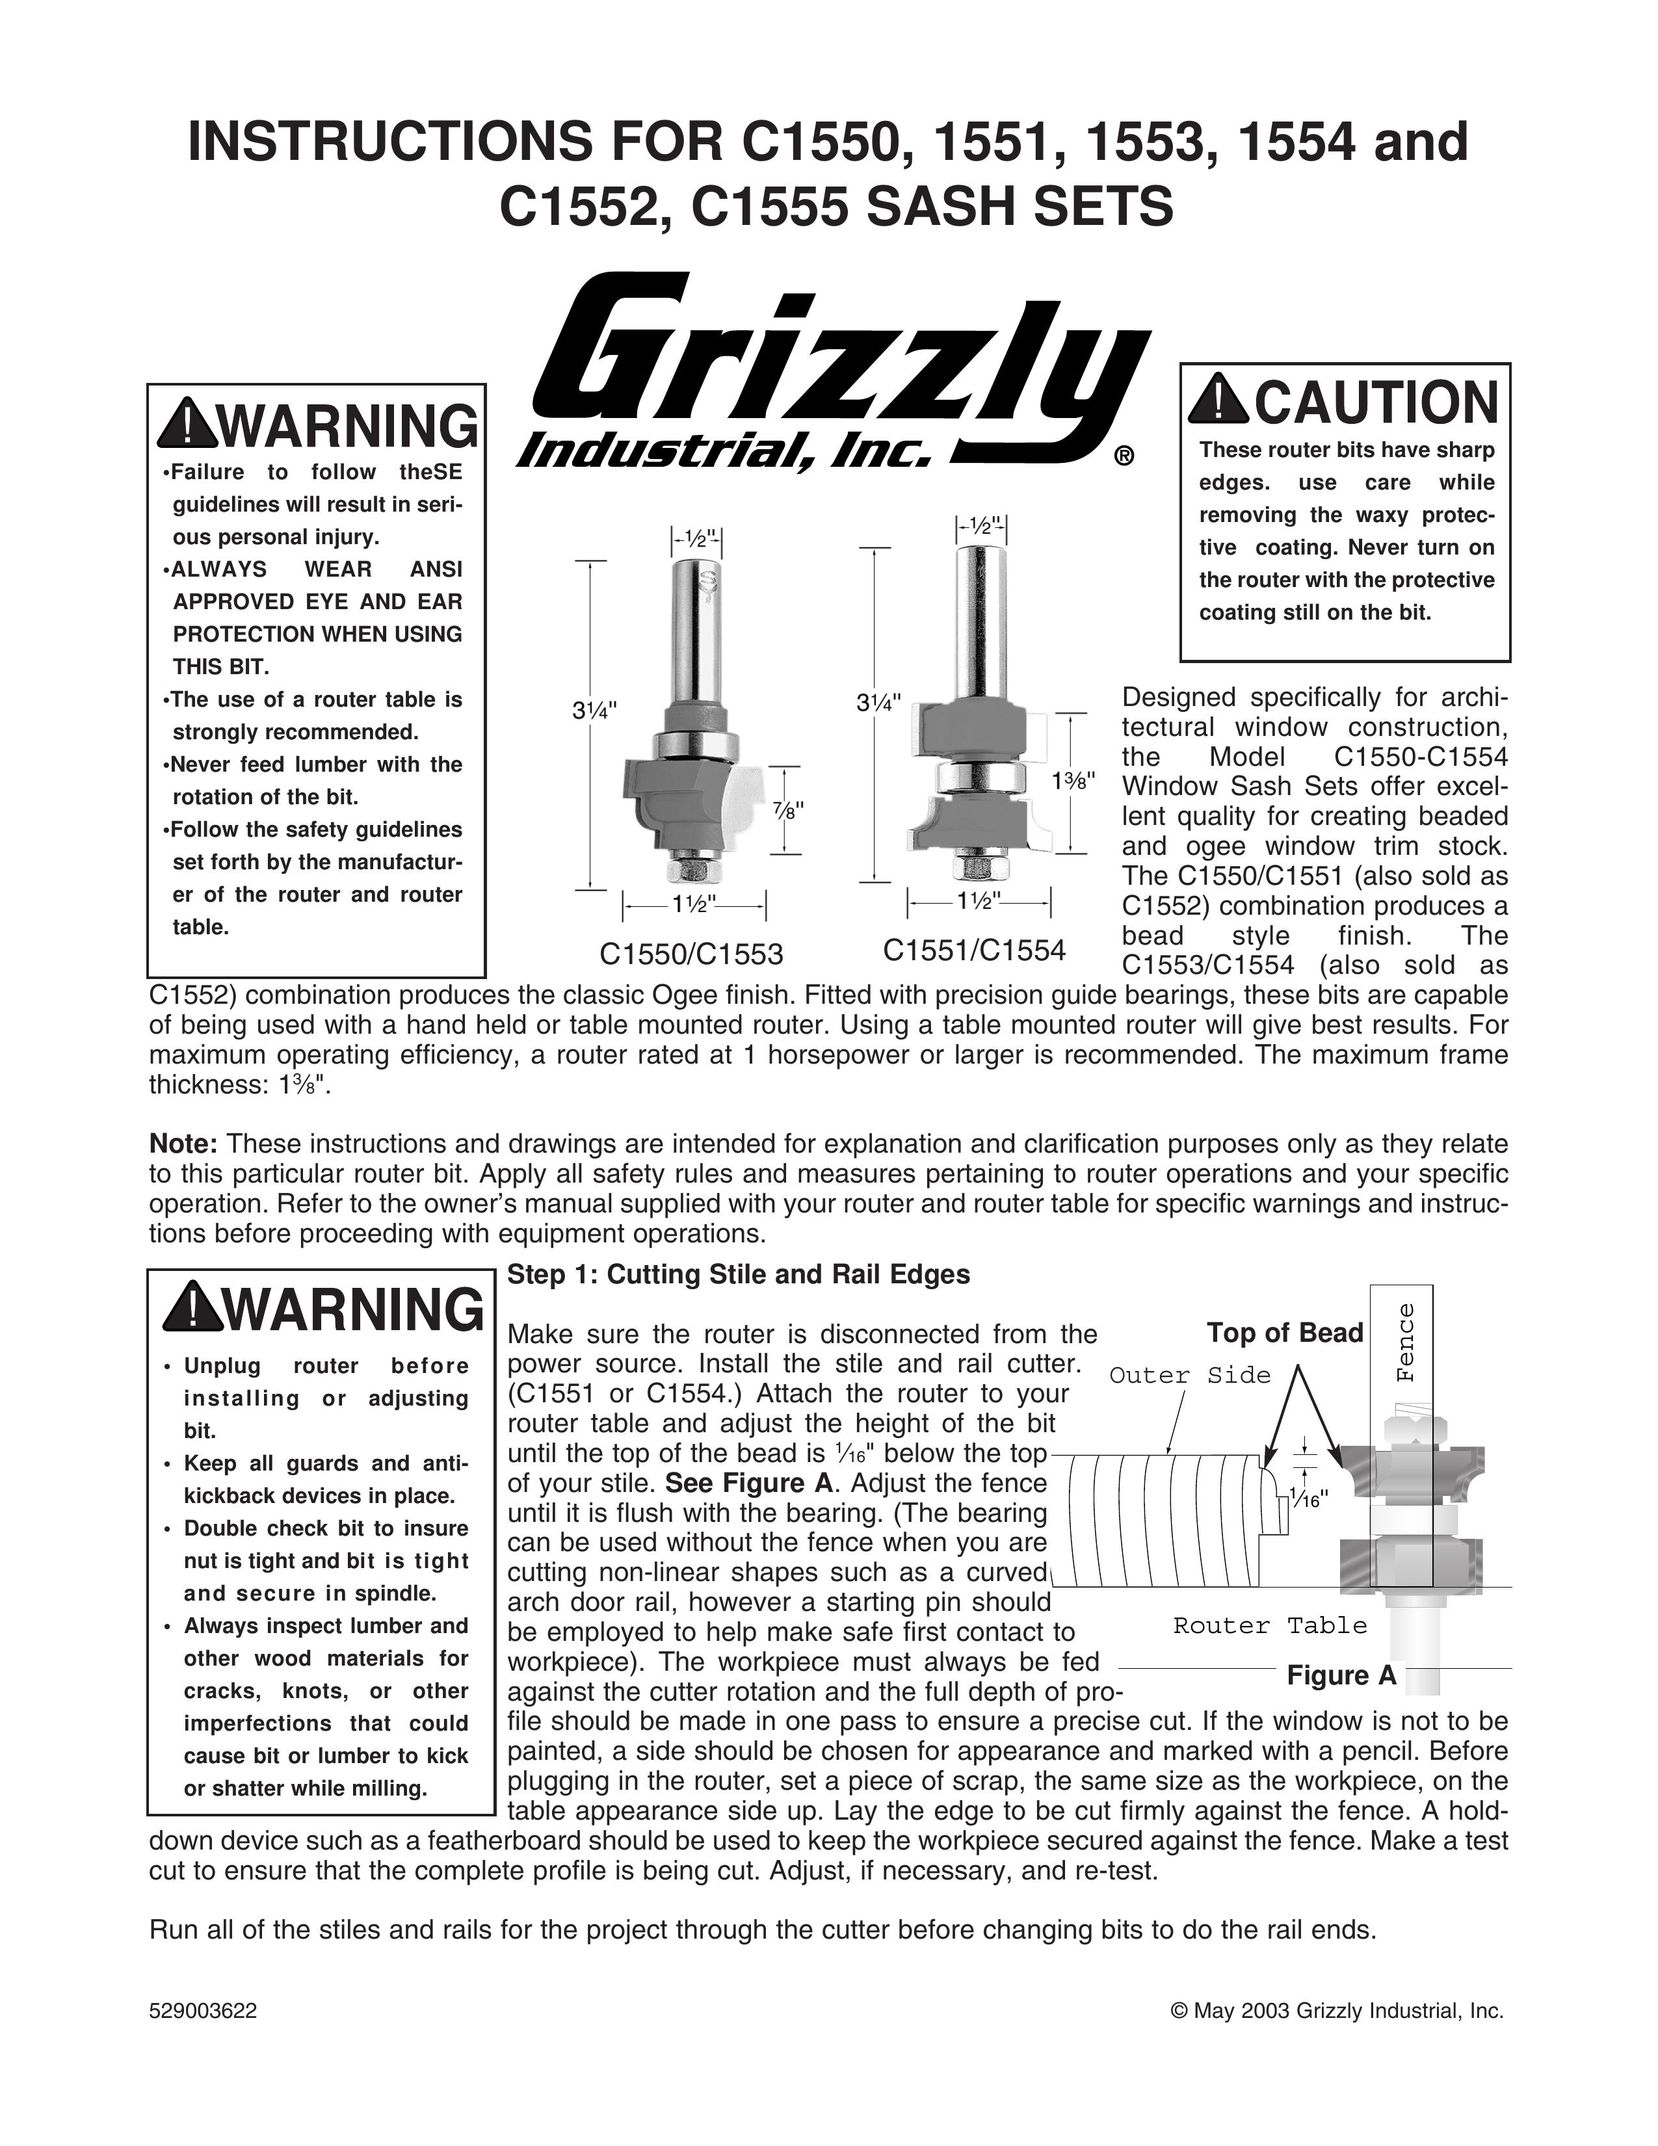 Grizzly 1551 Window User Manual